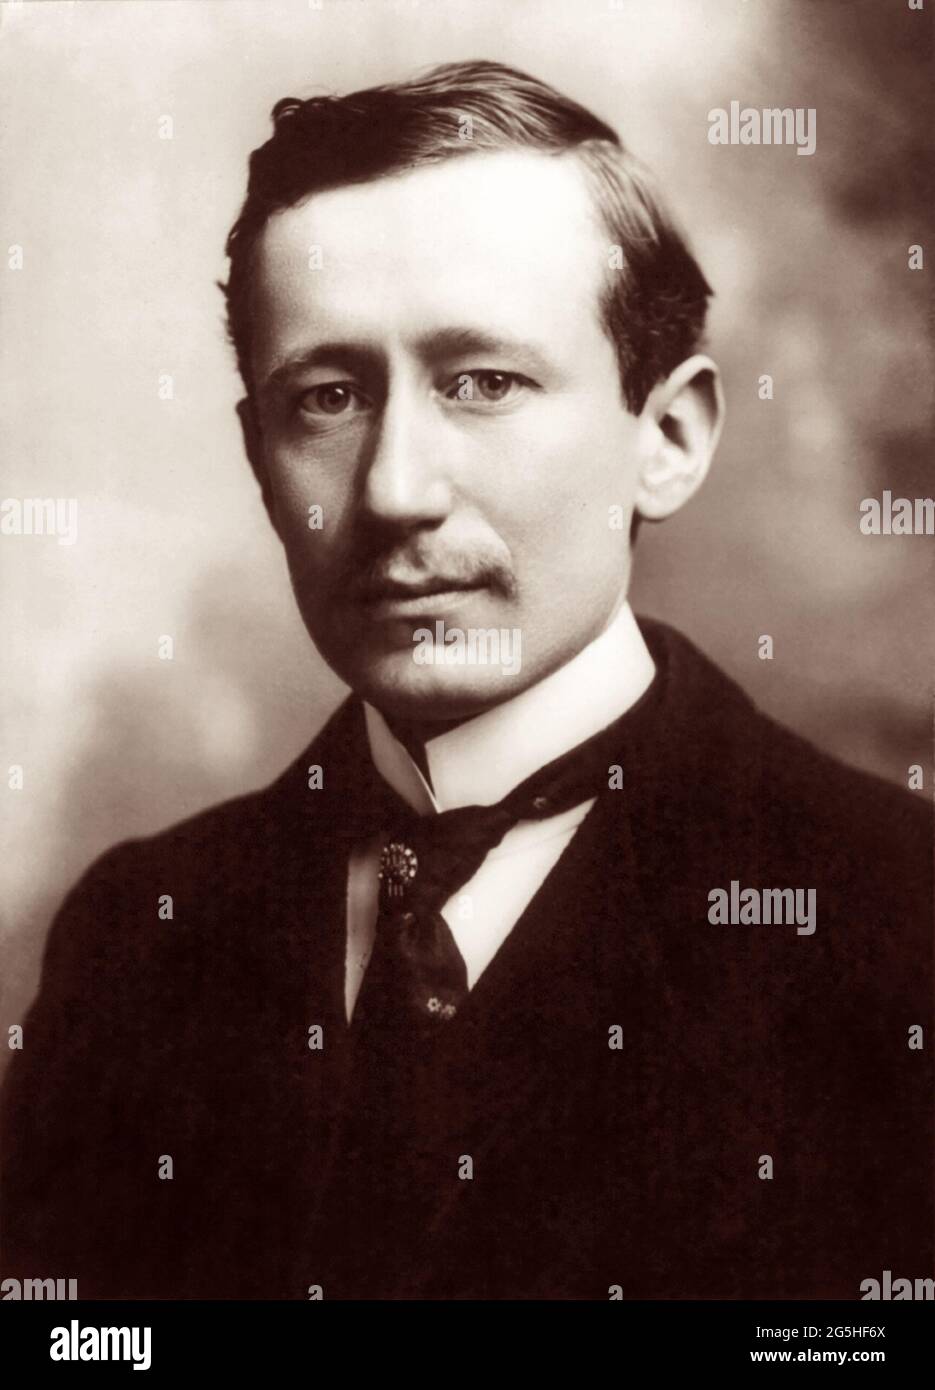 Guglielmo Marconi (1874-1937), Italian physicist and inventor of radio who shared the 1909 Nobel Prize in Physics with Karl Ferdinand Braun 'in recognition of their contributions to the development of wireless telegraphy'. Stock Photo